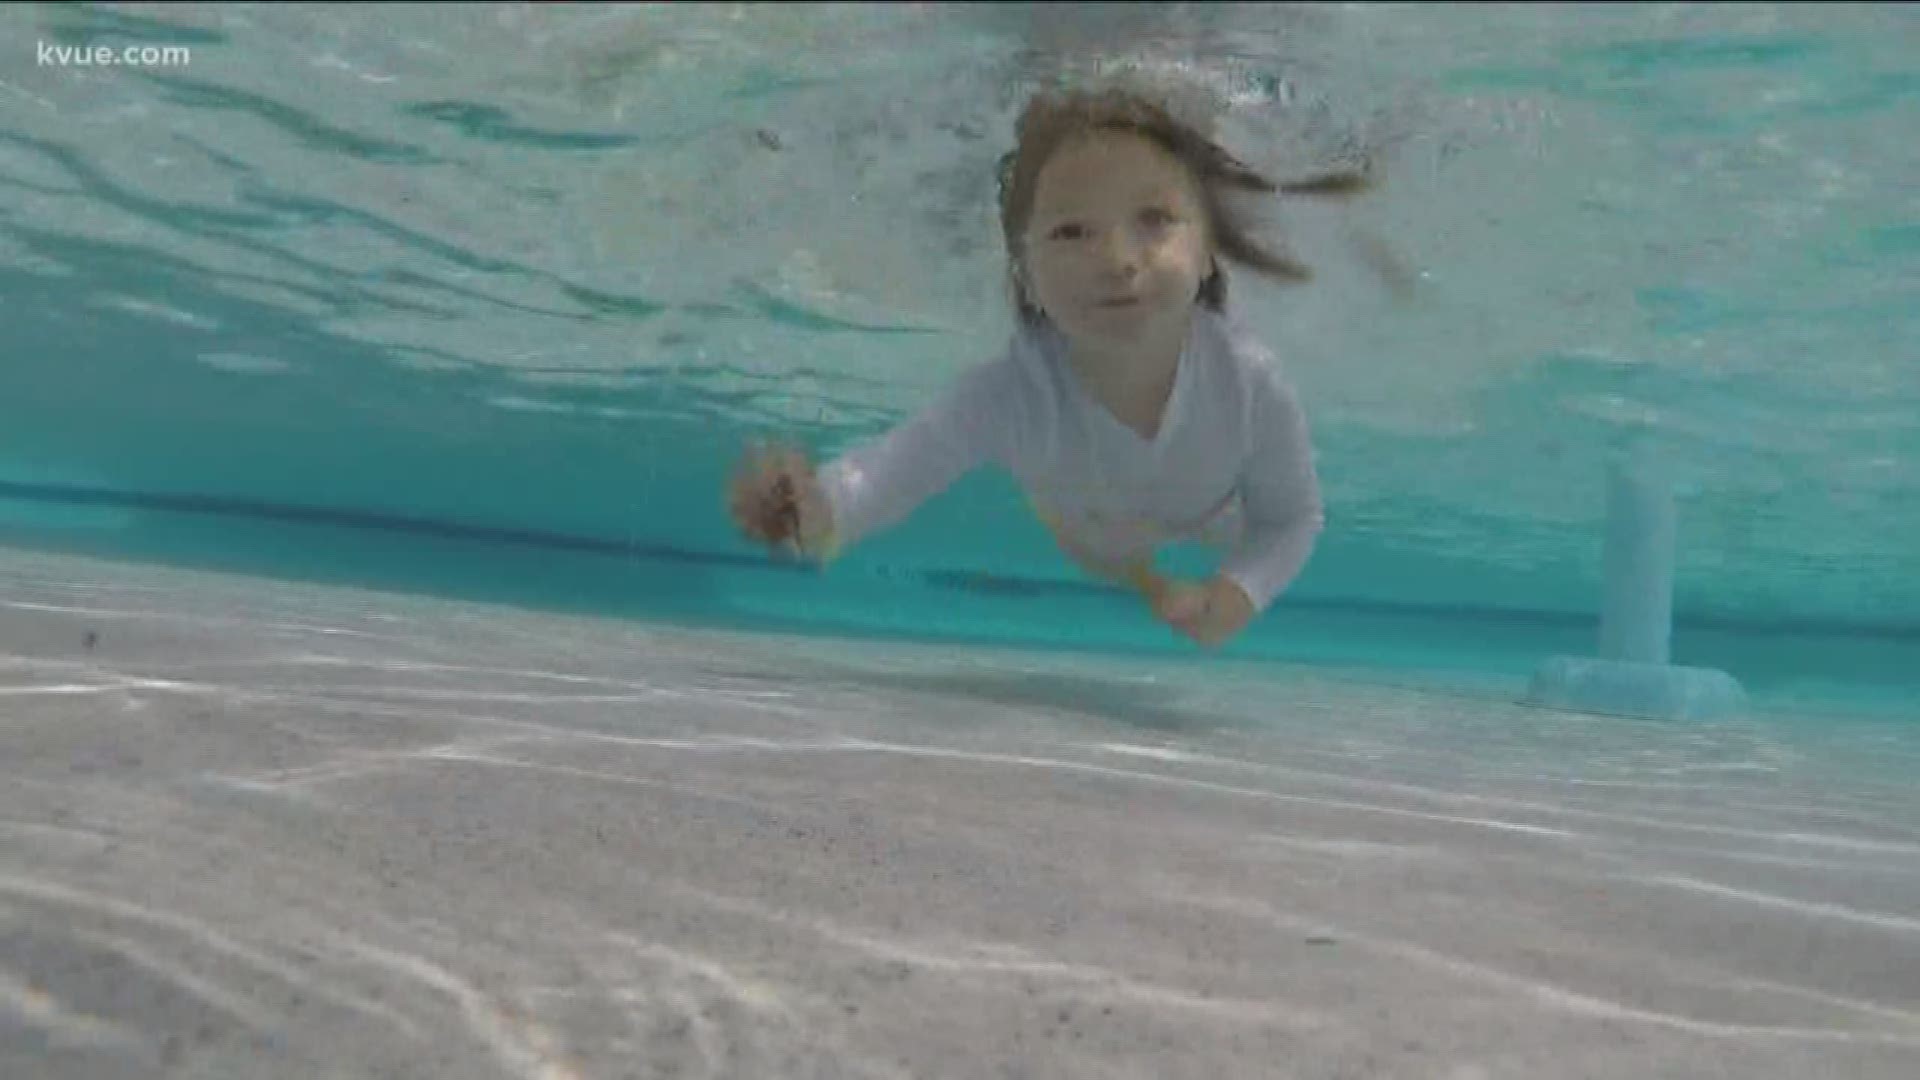 Experts say the main way to avoid child drownings is to teach kids how to swim.